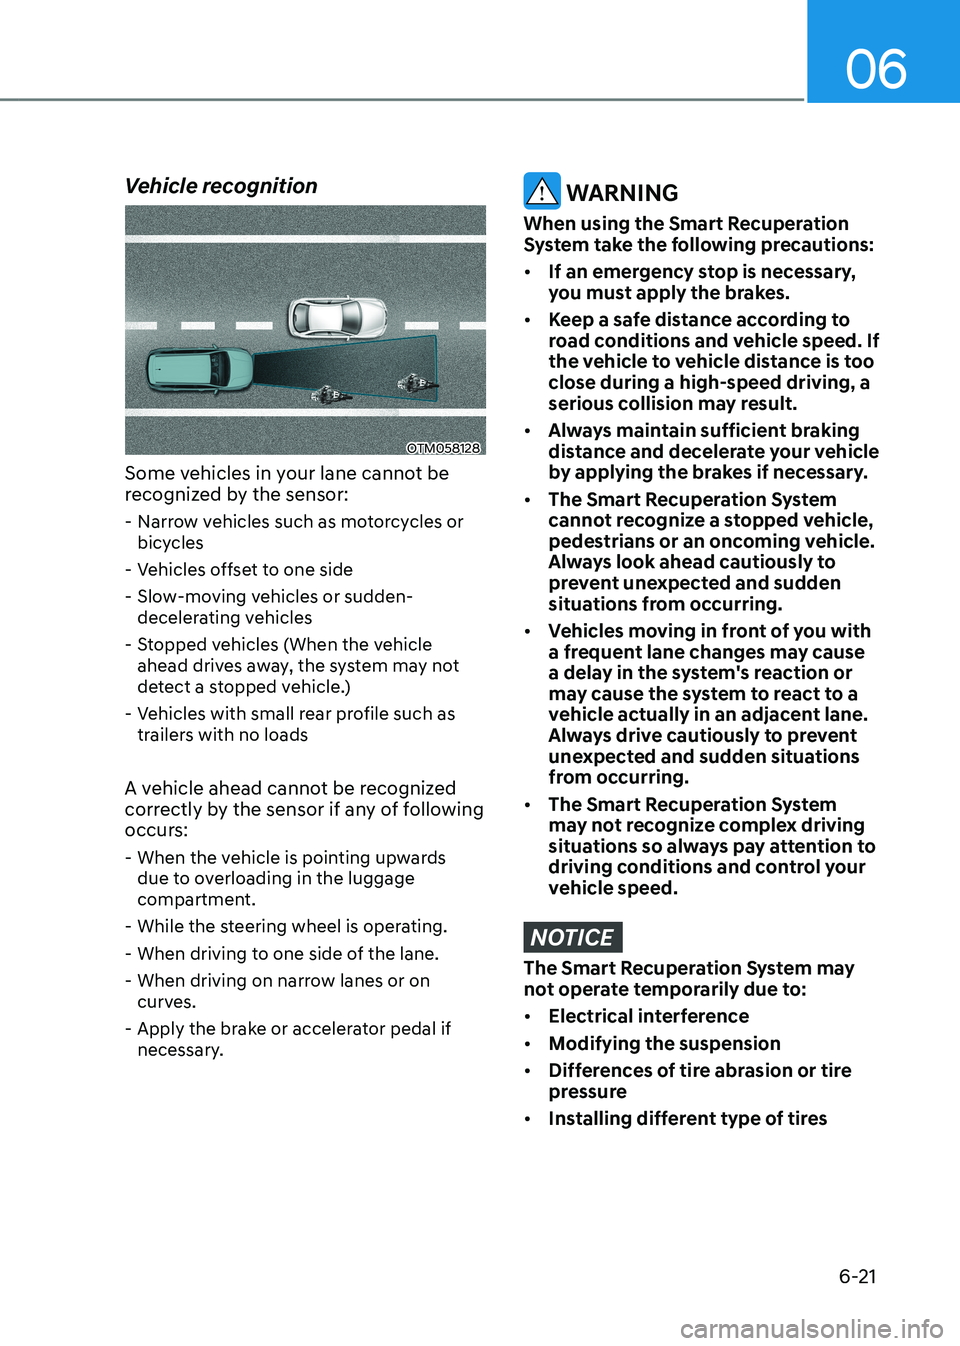 HYUNDAI KONA EV 2023  Owners Manual 06
6-21
Vehicle recognition
OTM058128
Some vehicles in your lane cannot be  
recognized by the sensor:  - Narrow vehicles such as motorcycles or bicycles
 - Vehicles offset to one side 
 - Slow-moving